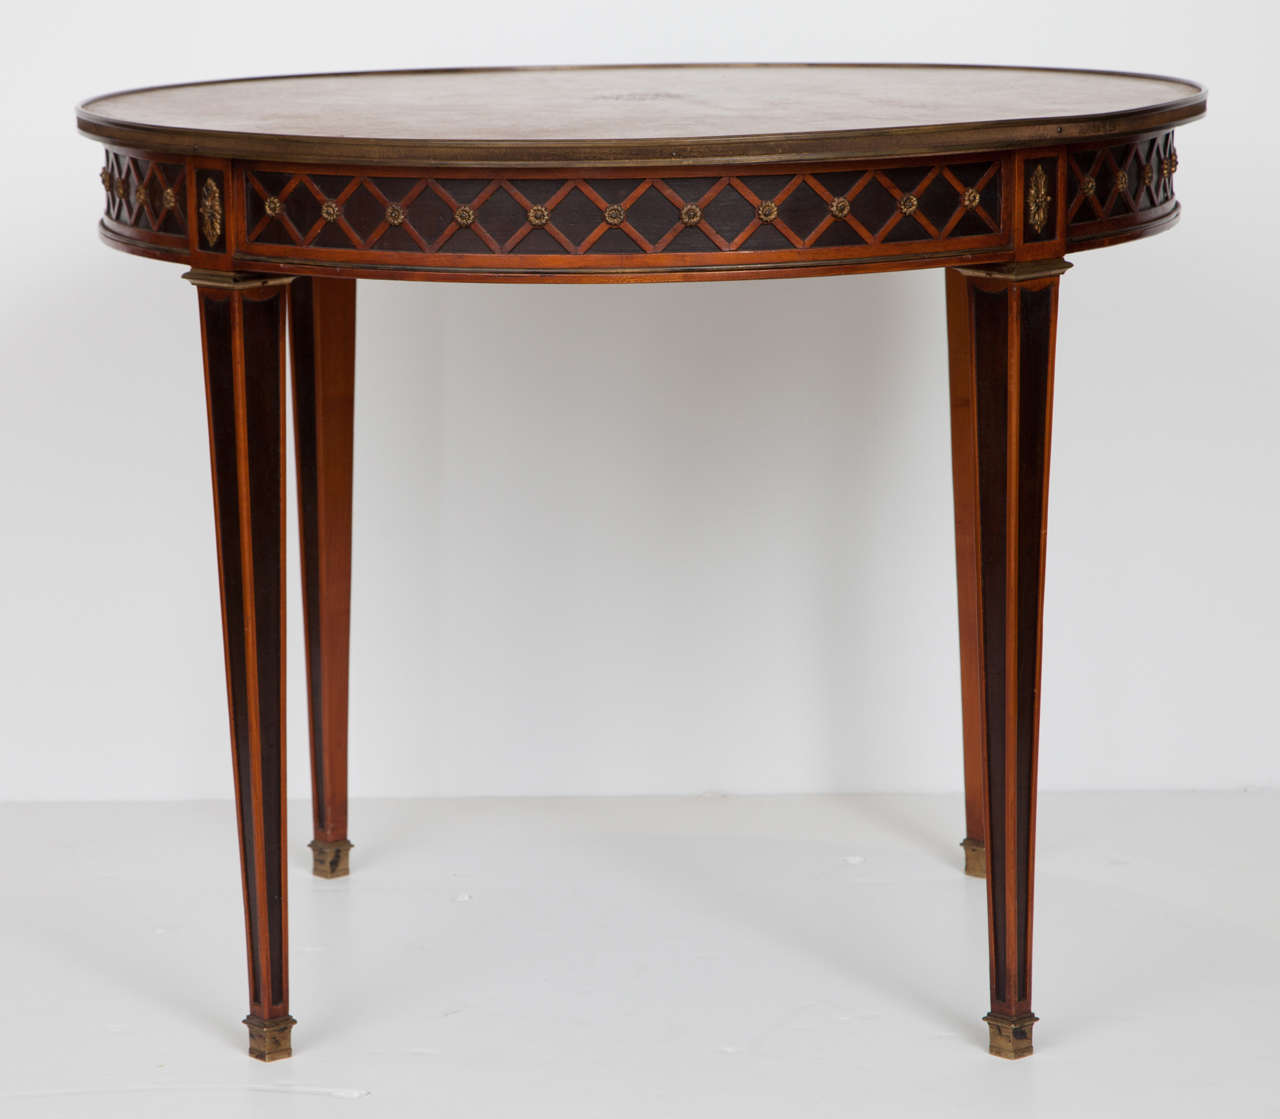 A Louis XVI style gueridon of exceptional quality and workmanship. Attributed to Maison Jansen, this table has ebonized, tapered legs and apron, with a lovely X-pattern overlay, gilt bronze accents and a leather top.